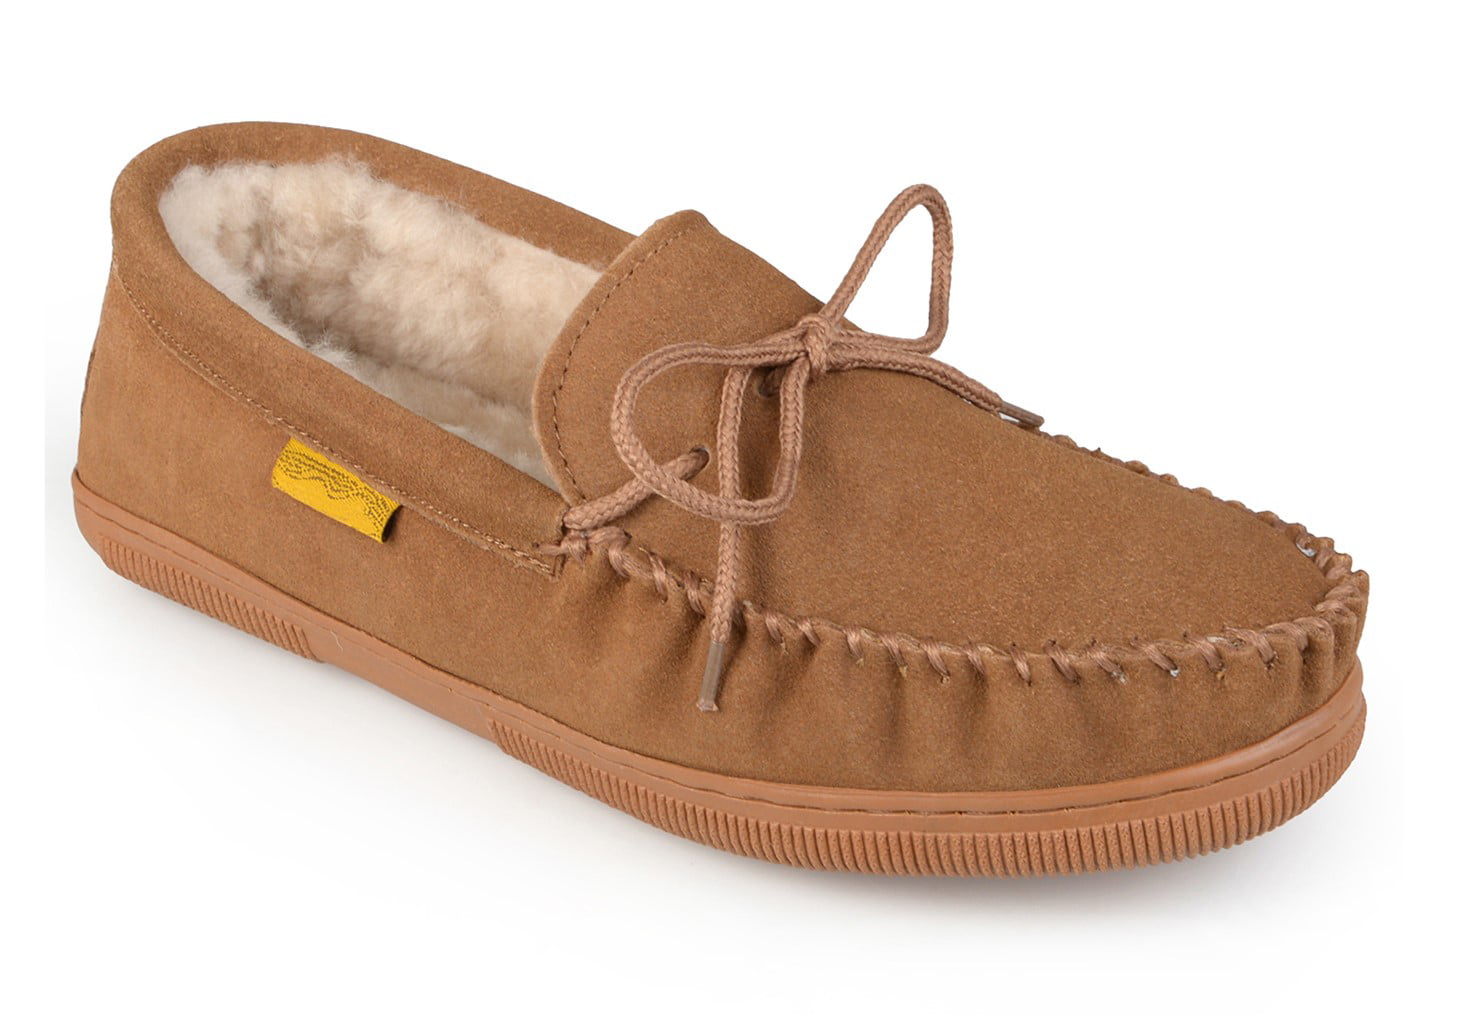 real leather moccasin slippers